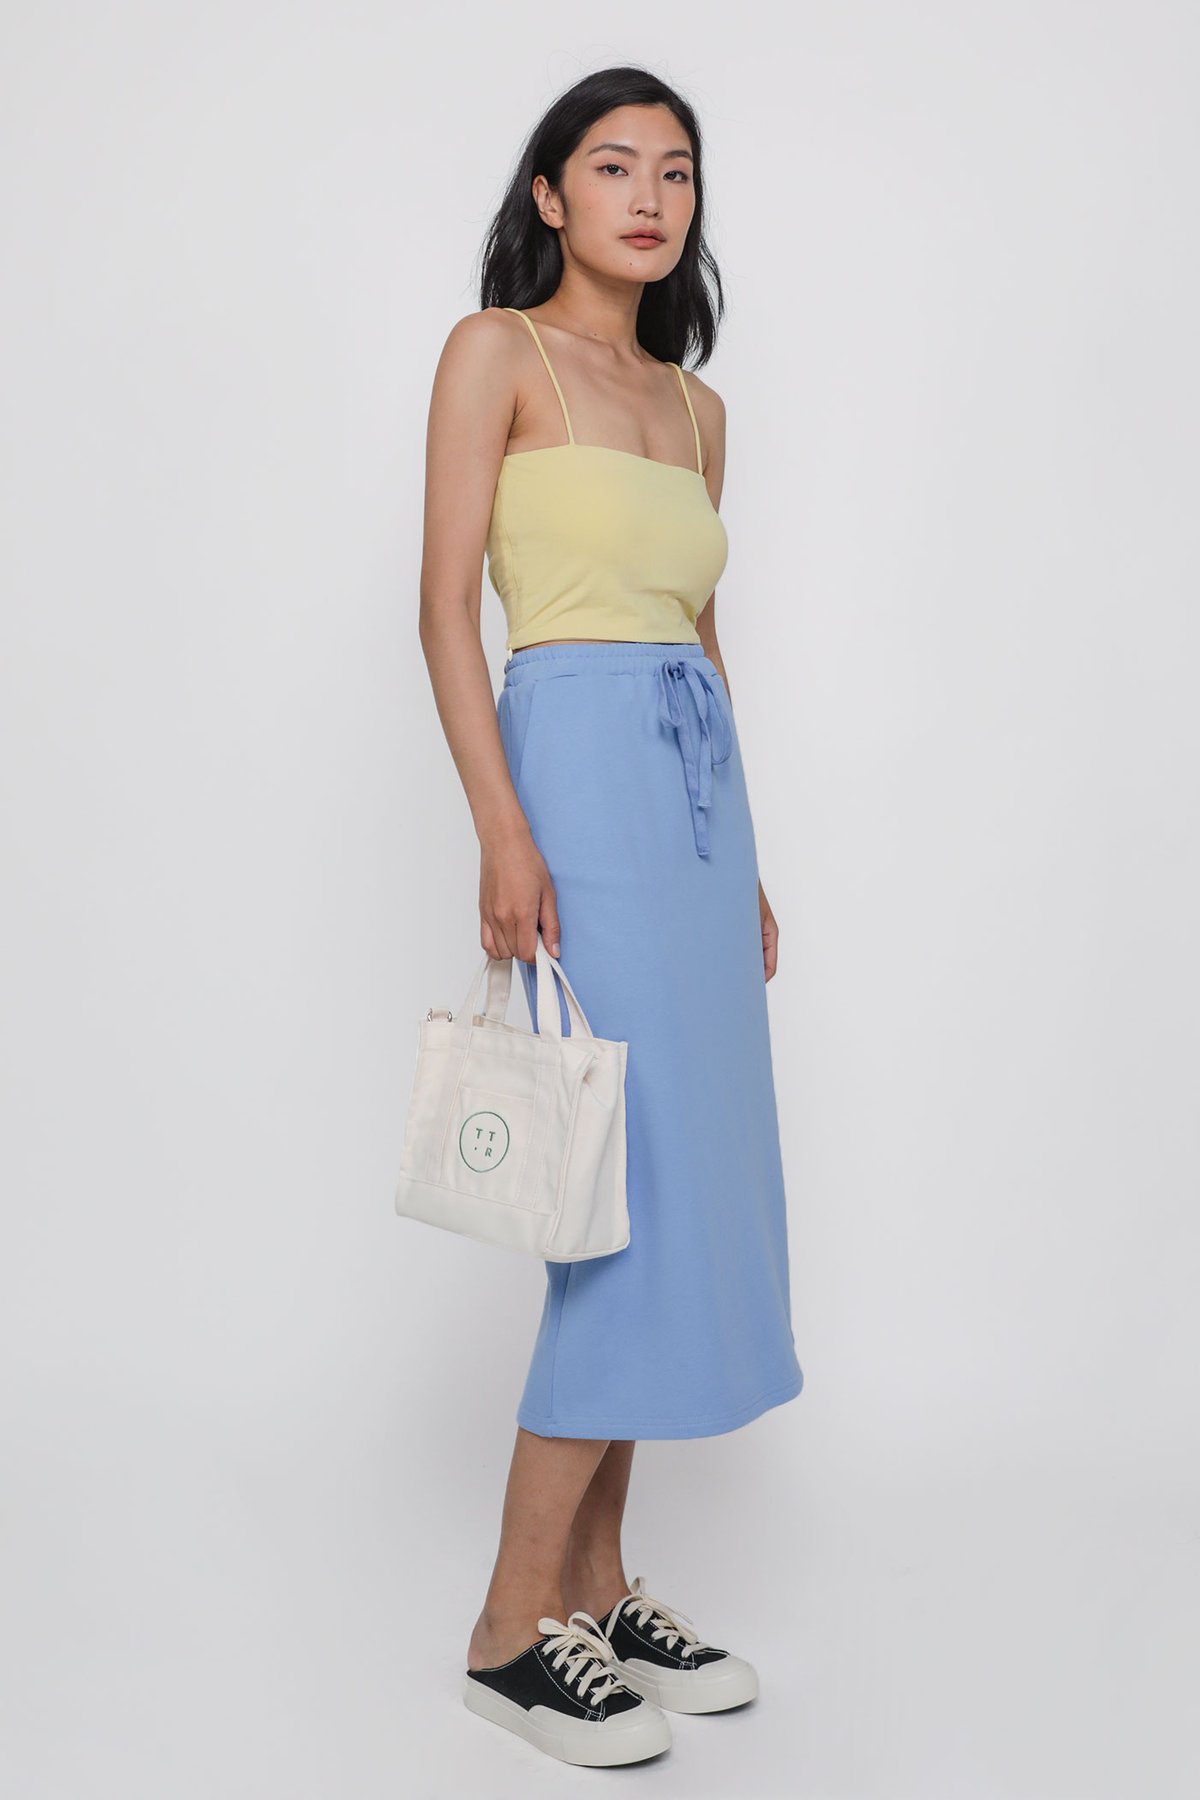 Andes Padded Crop Top (Yellow)